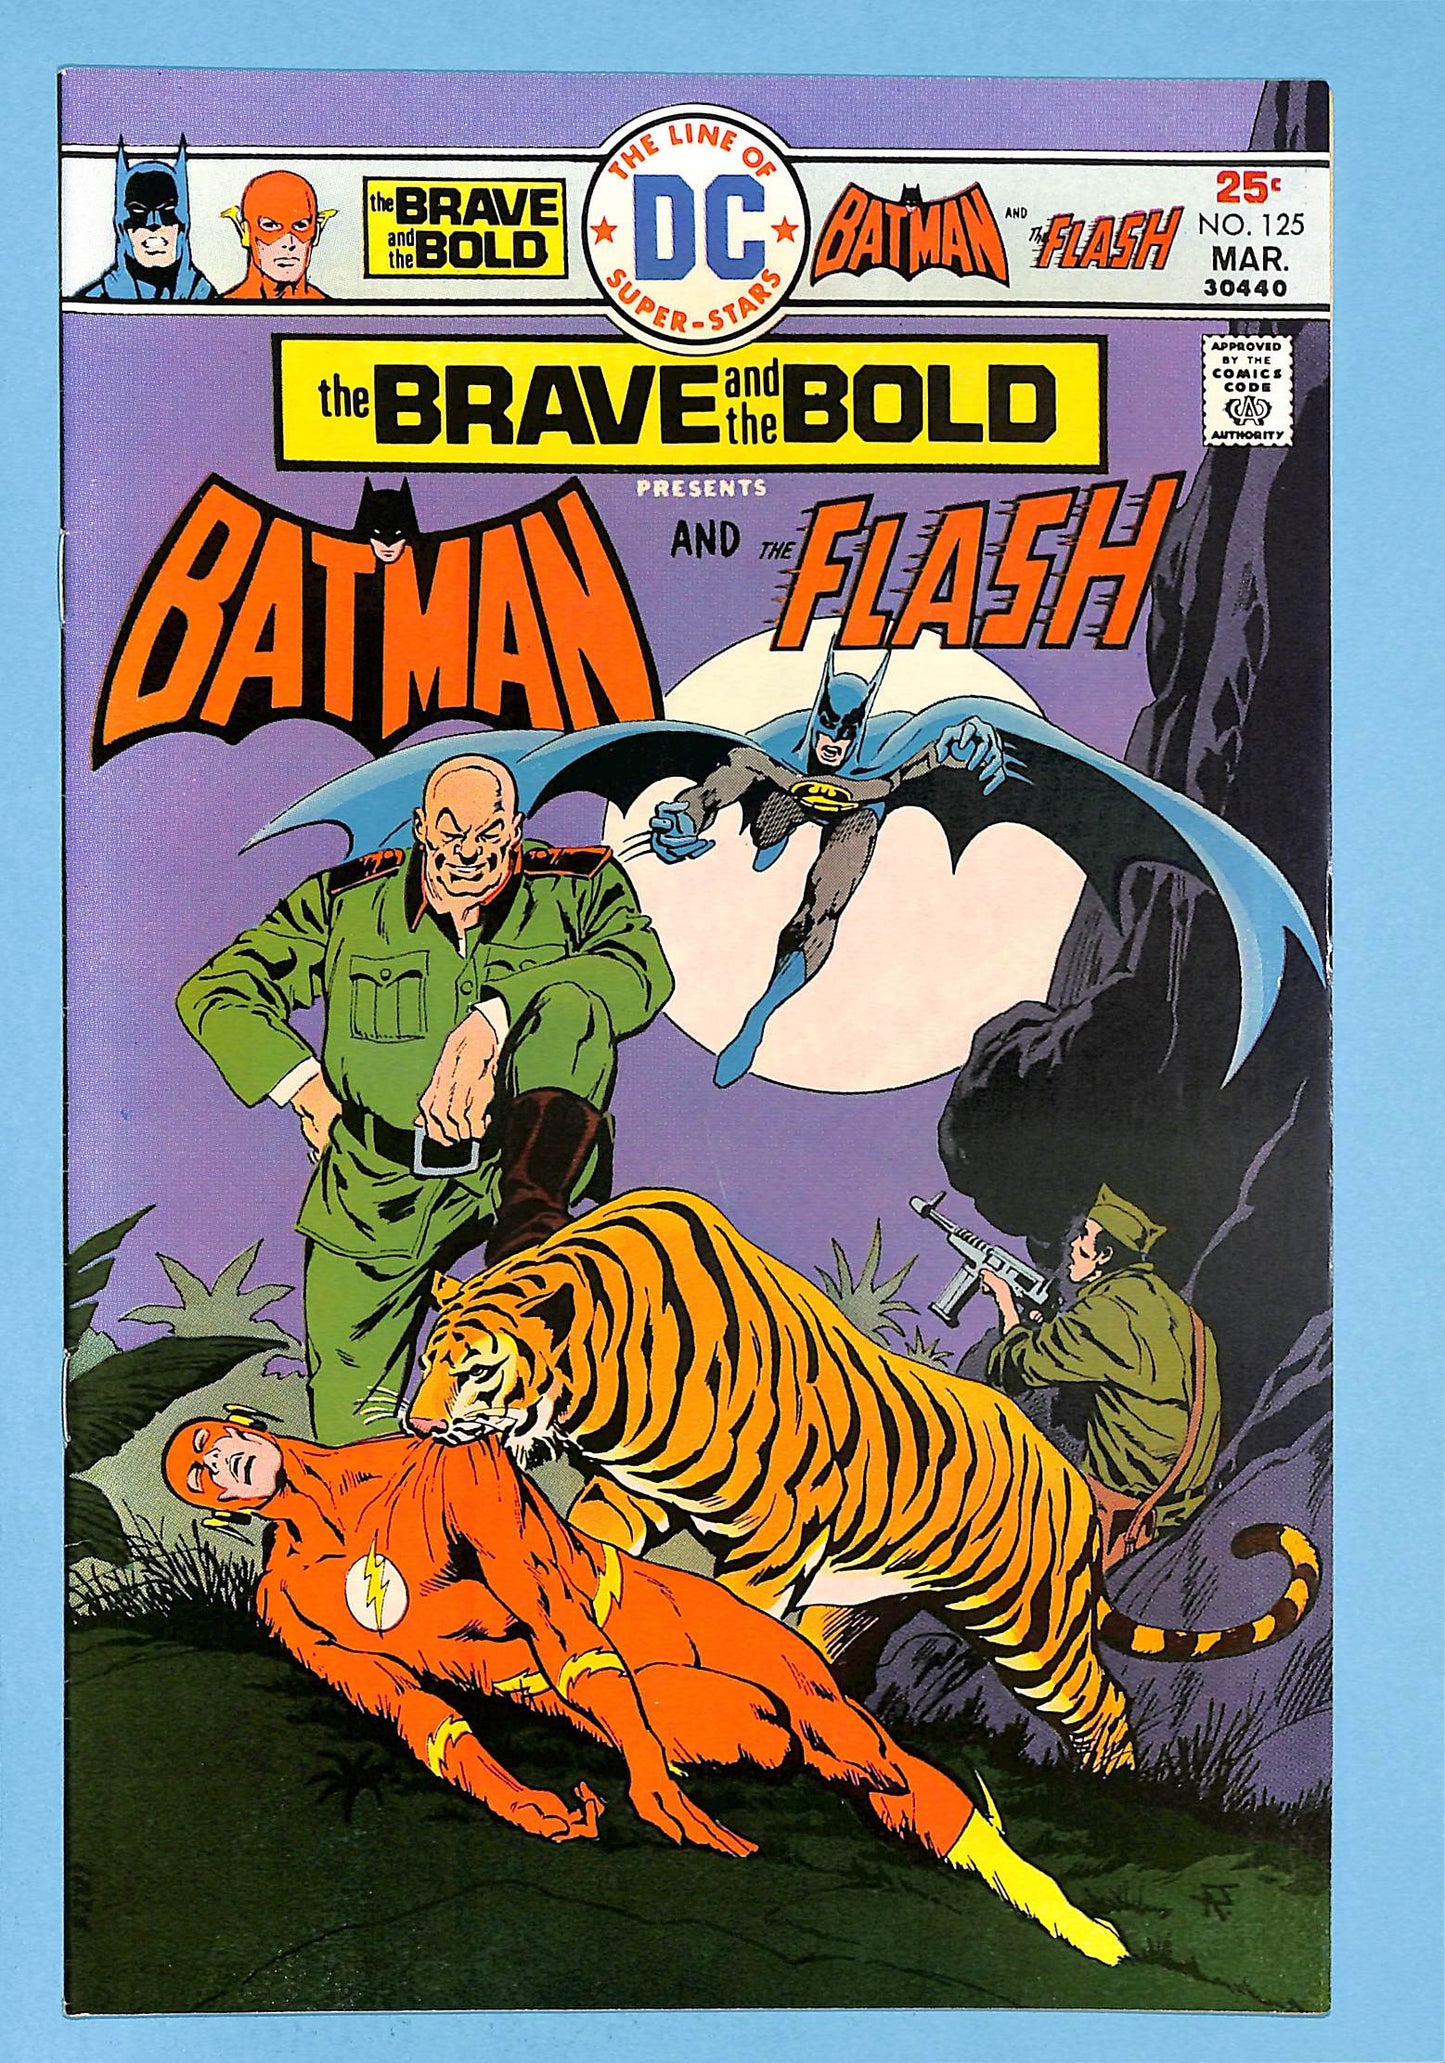 Brave and the Bold #125 Batman and the Flash